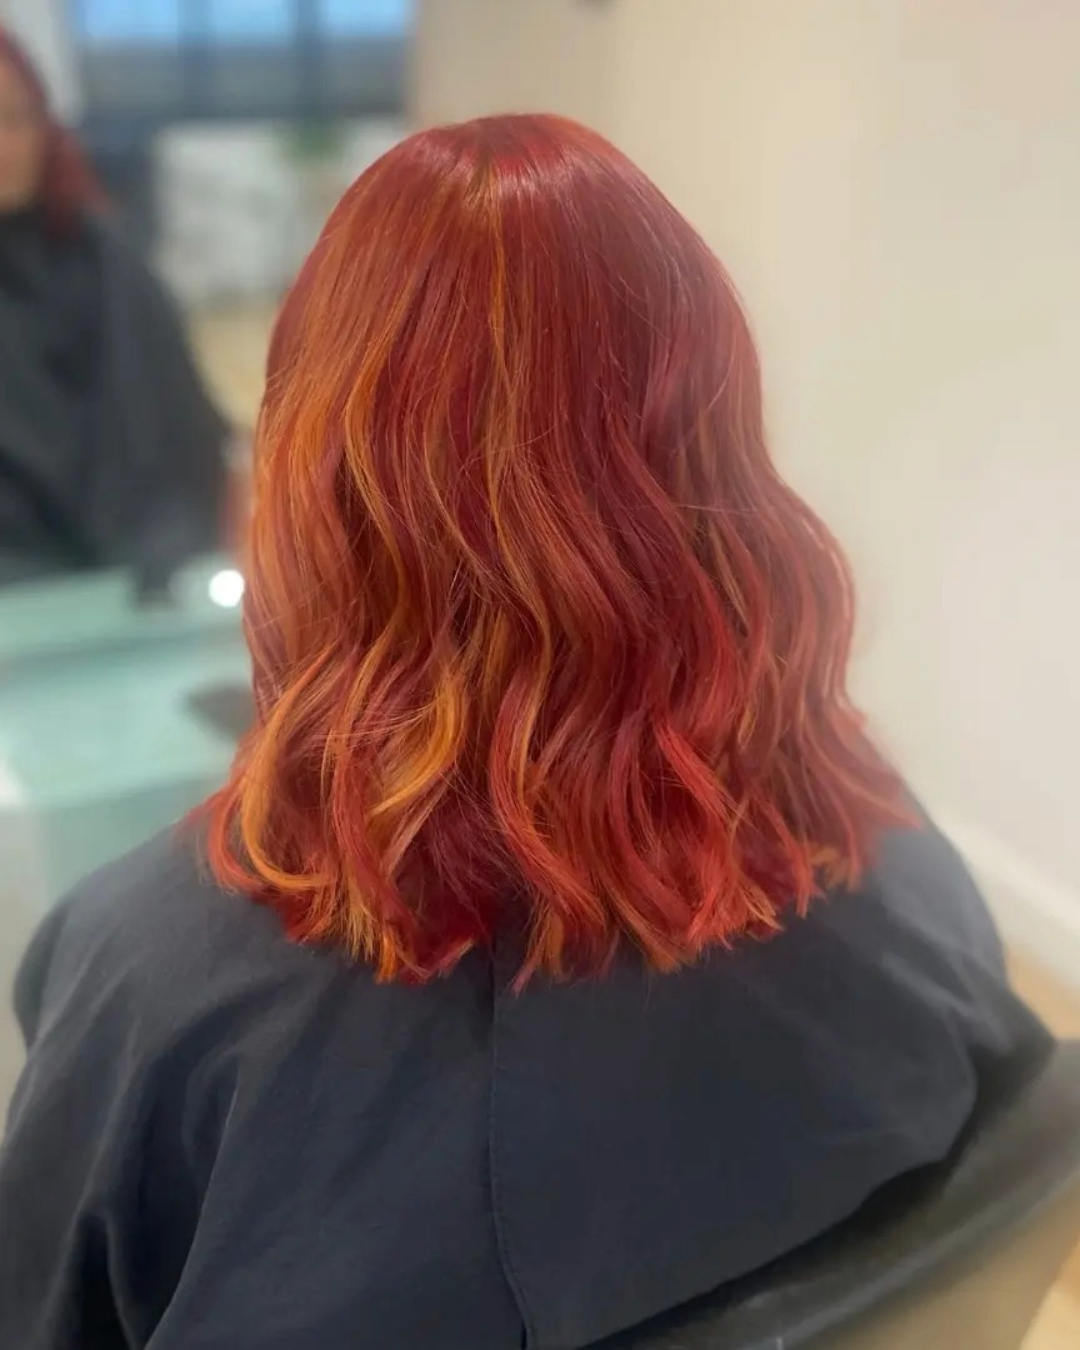 spring hair trends at The Cutting Company in Loughborough